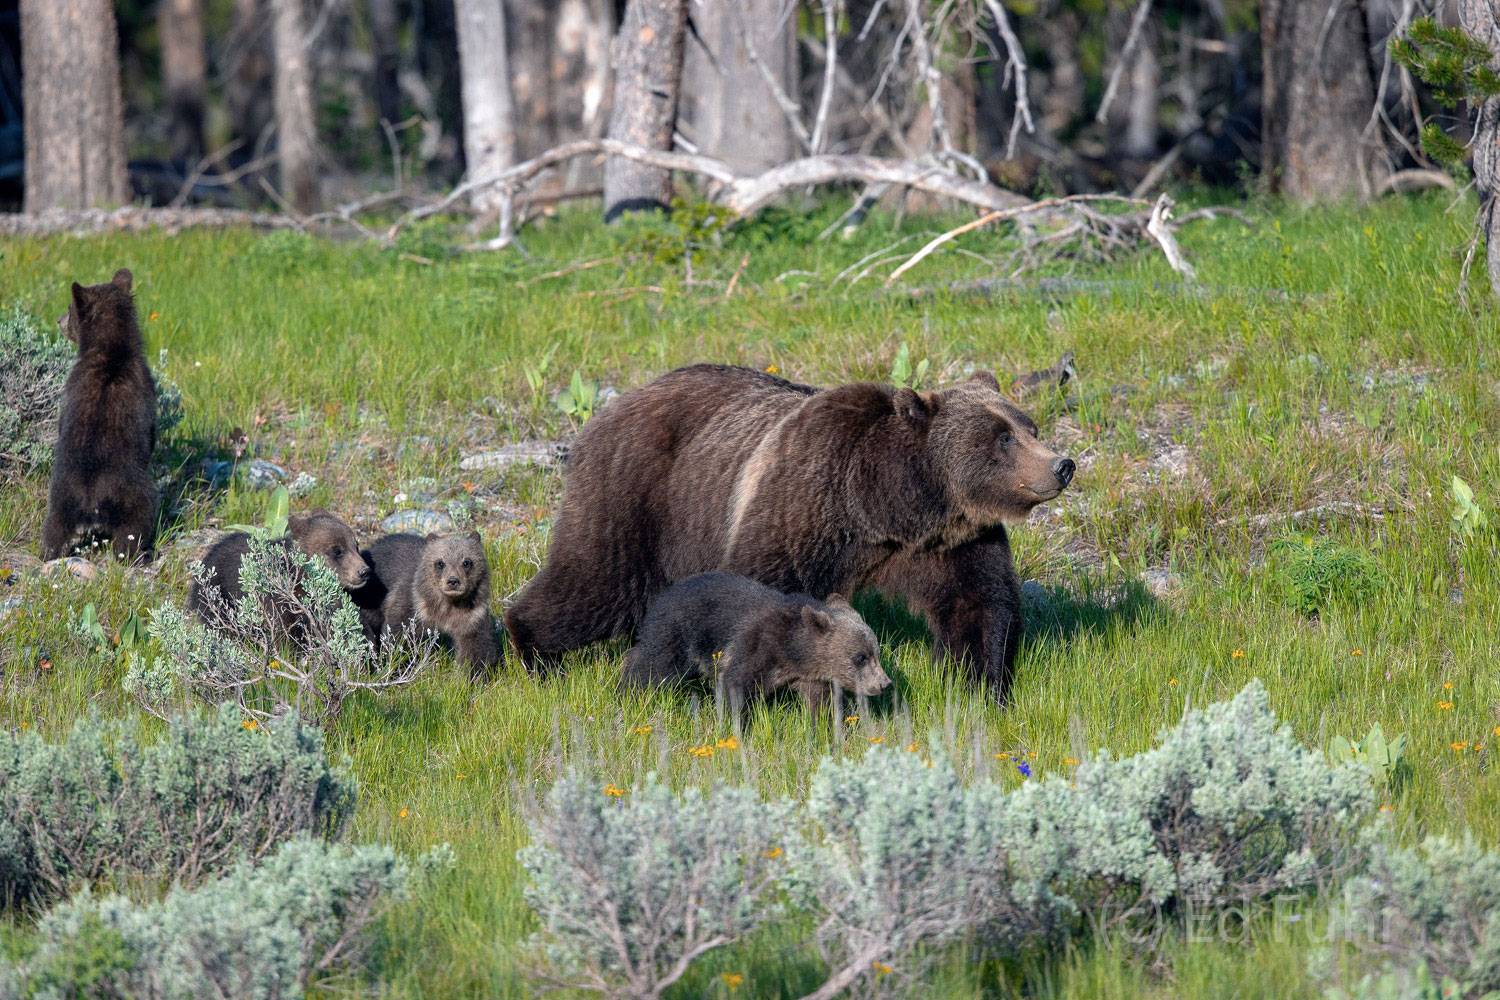 Grizzly 399 leads her cubs down a hillside and into the sagebrush.